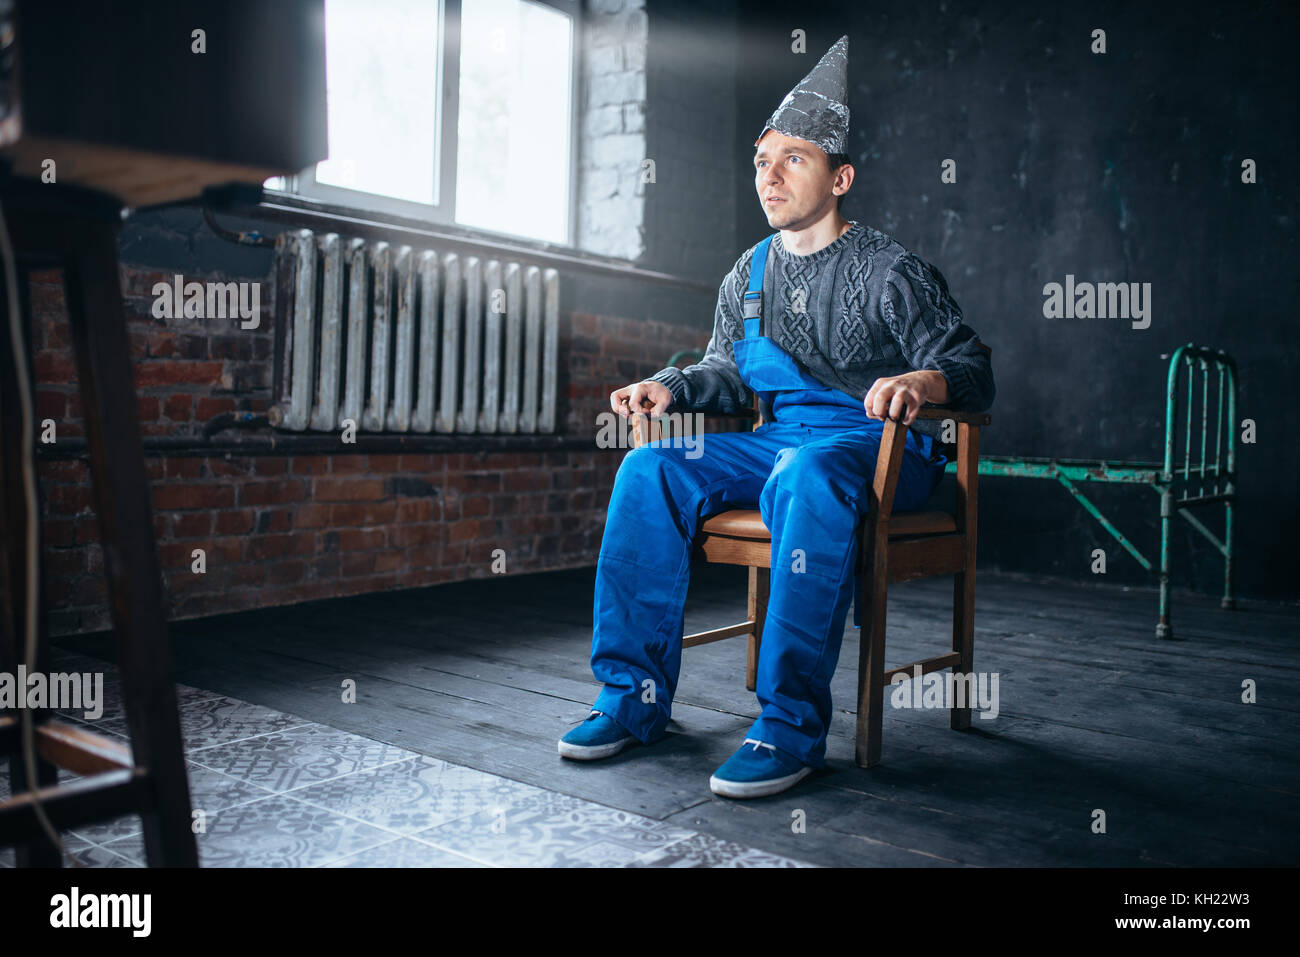 Afraided man in aluminum foil helmet sits in chair Stock Photo